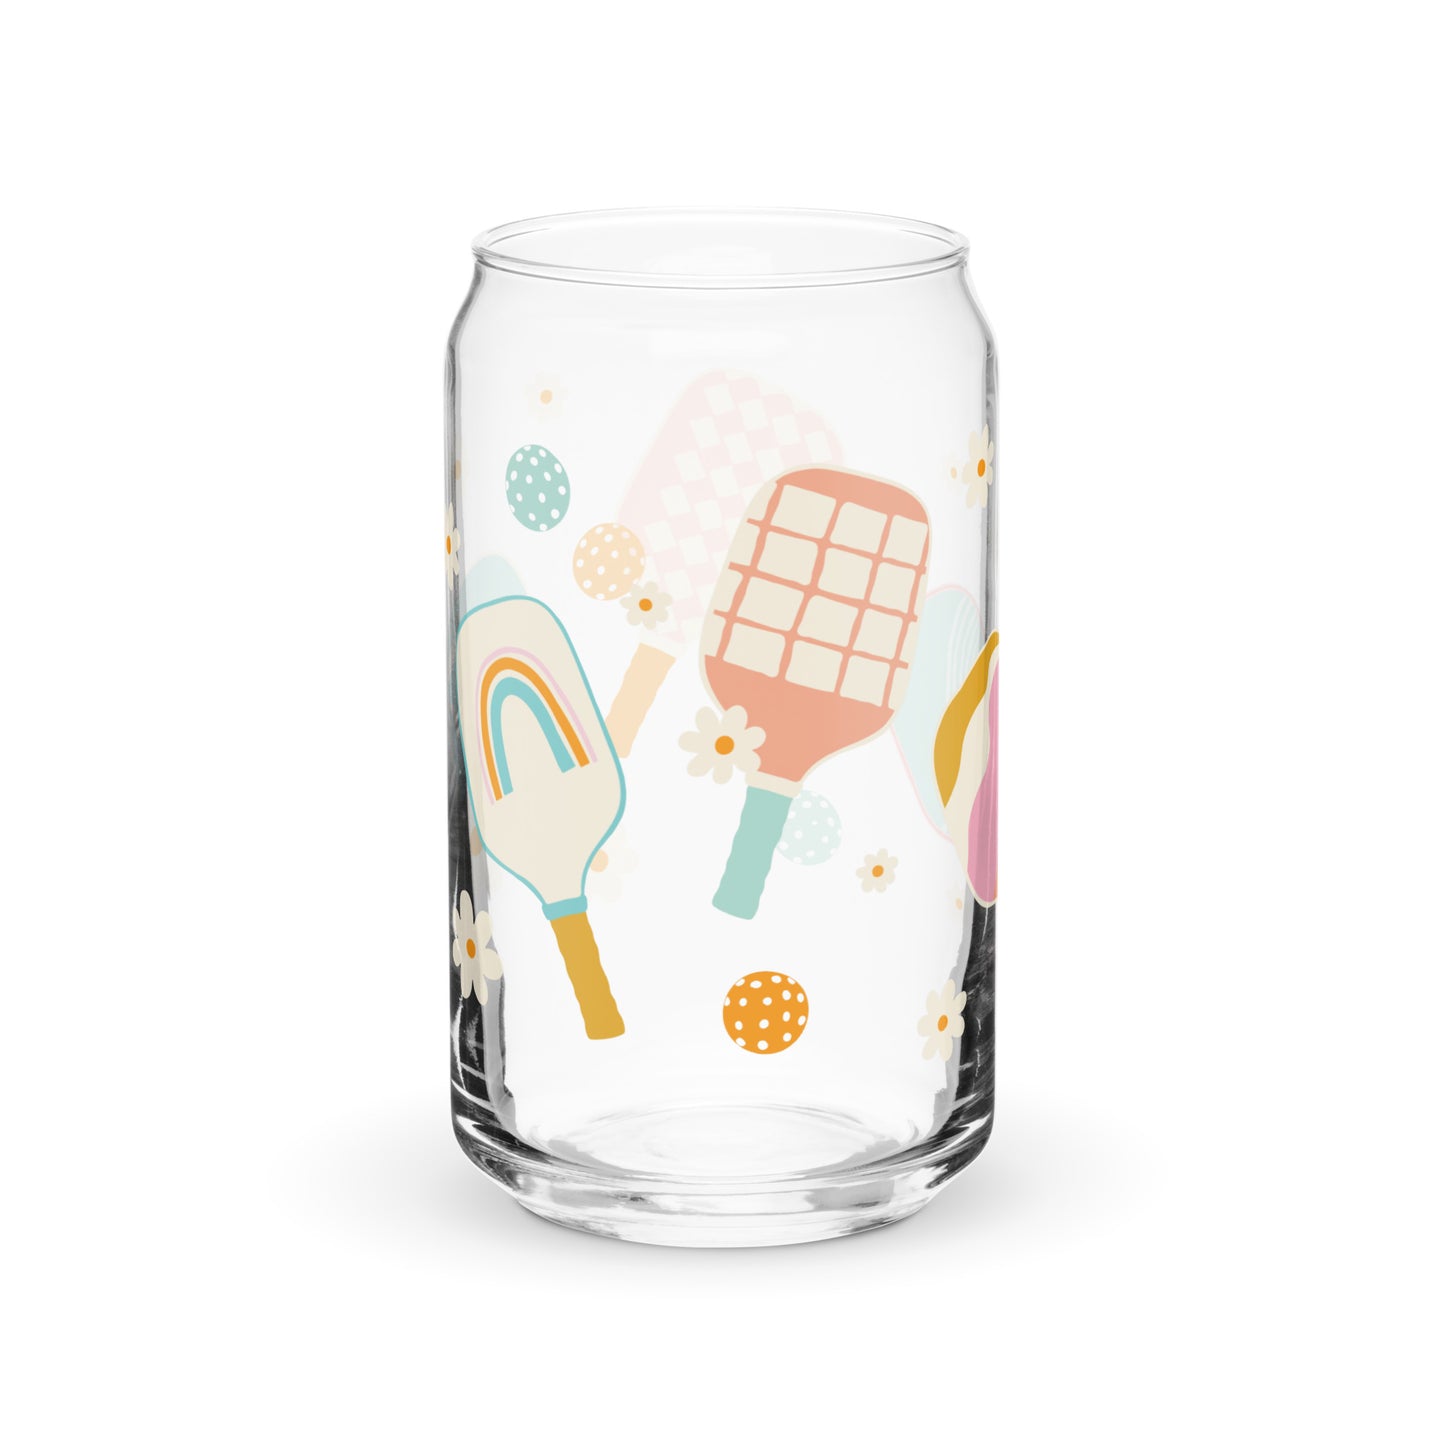 Pickleball can-shaped glass